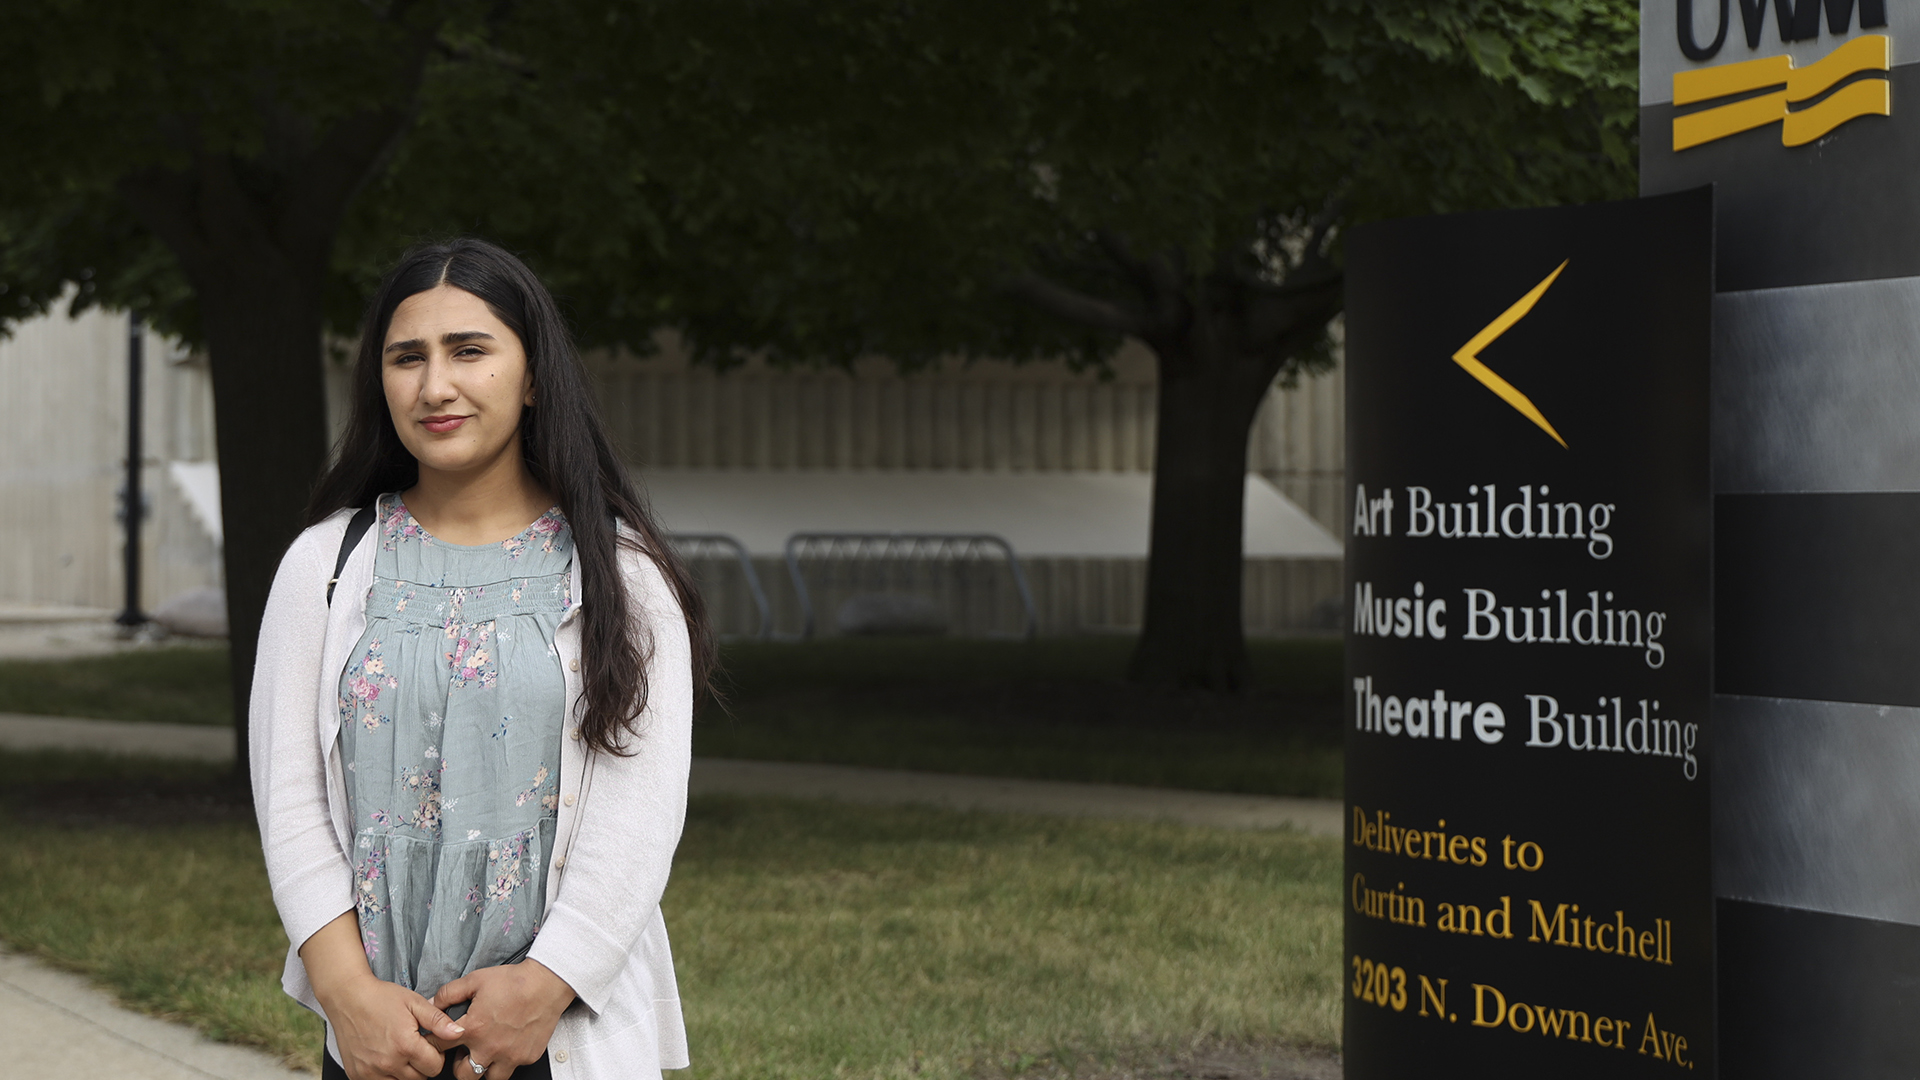 Mahrukh Delawarzad stands outdoors next to a sign with an arrow pointing toward the direction of an "Art Building," "Music Building" and "Theatre Building," with trees, bicycle racks and a building in the background.